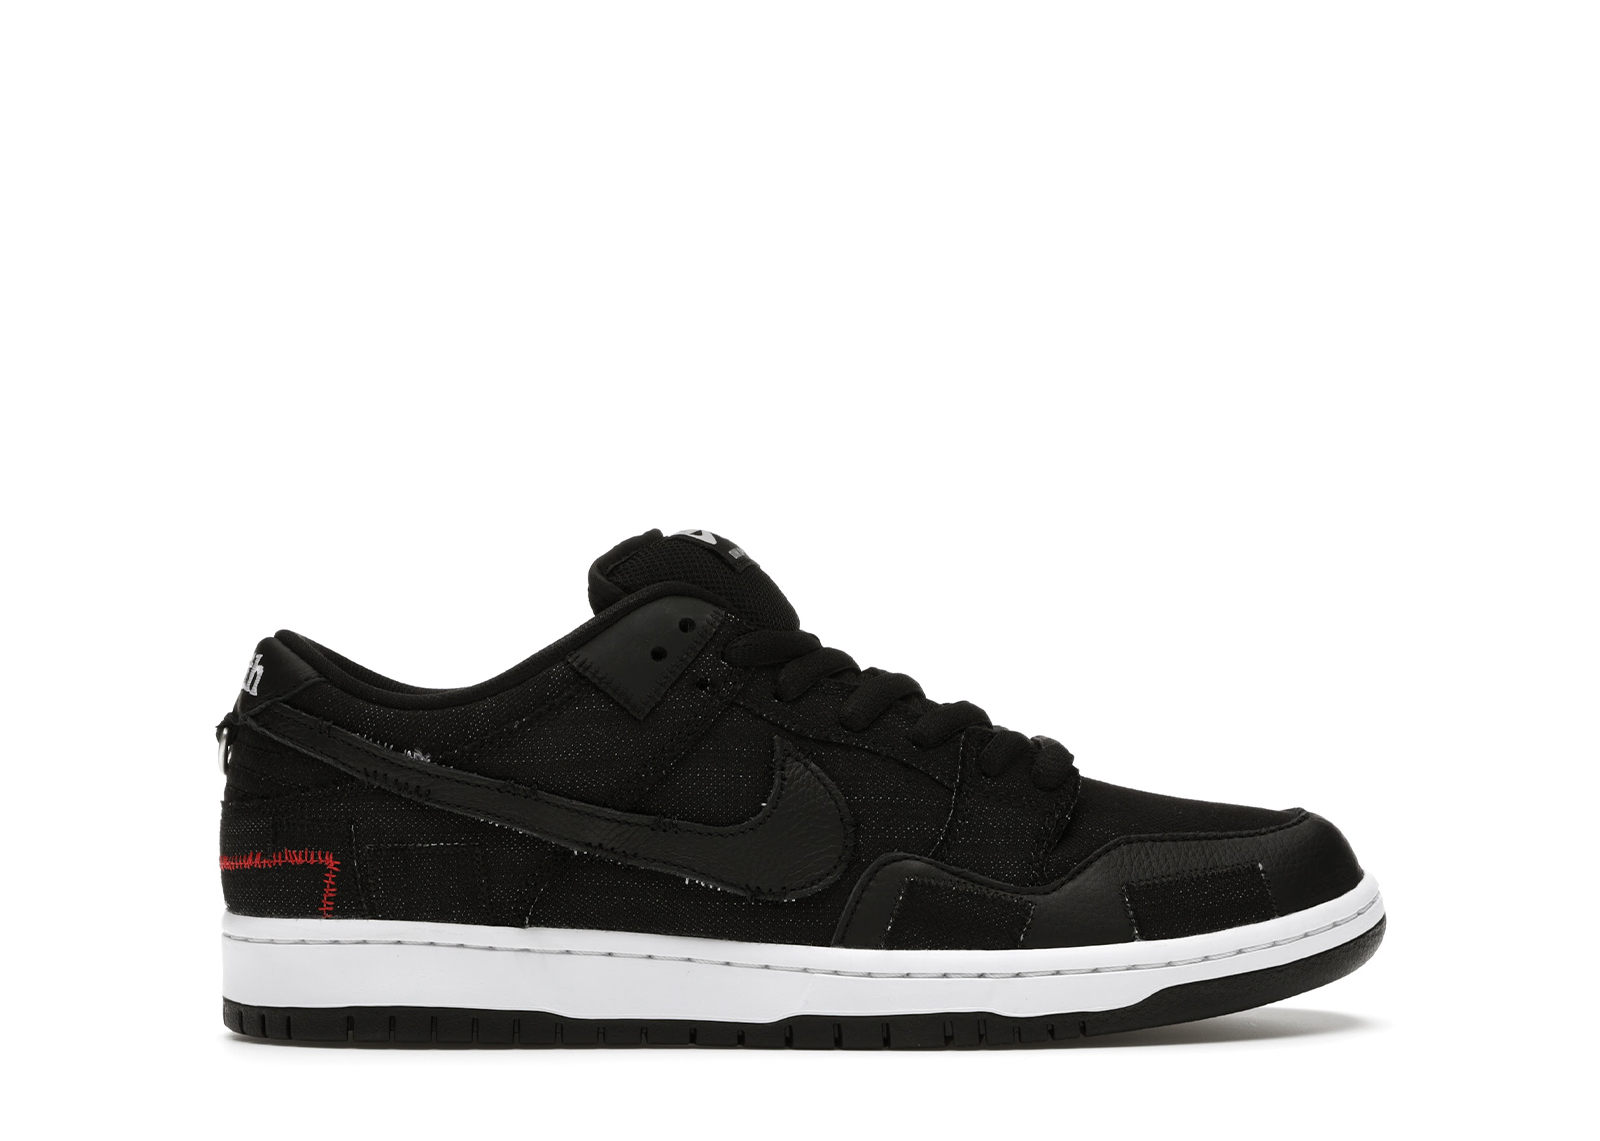 WASTED YOUTH NIKE SB DUNK LOW 26.5cm